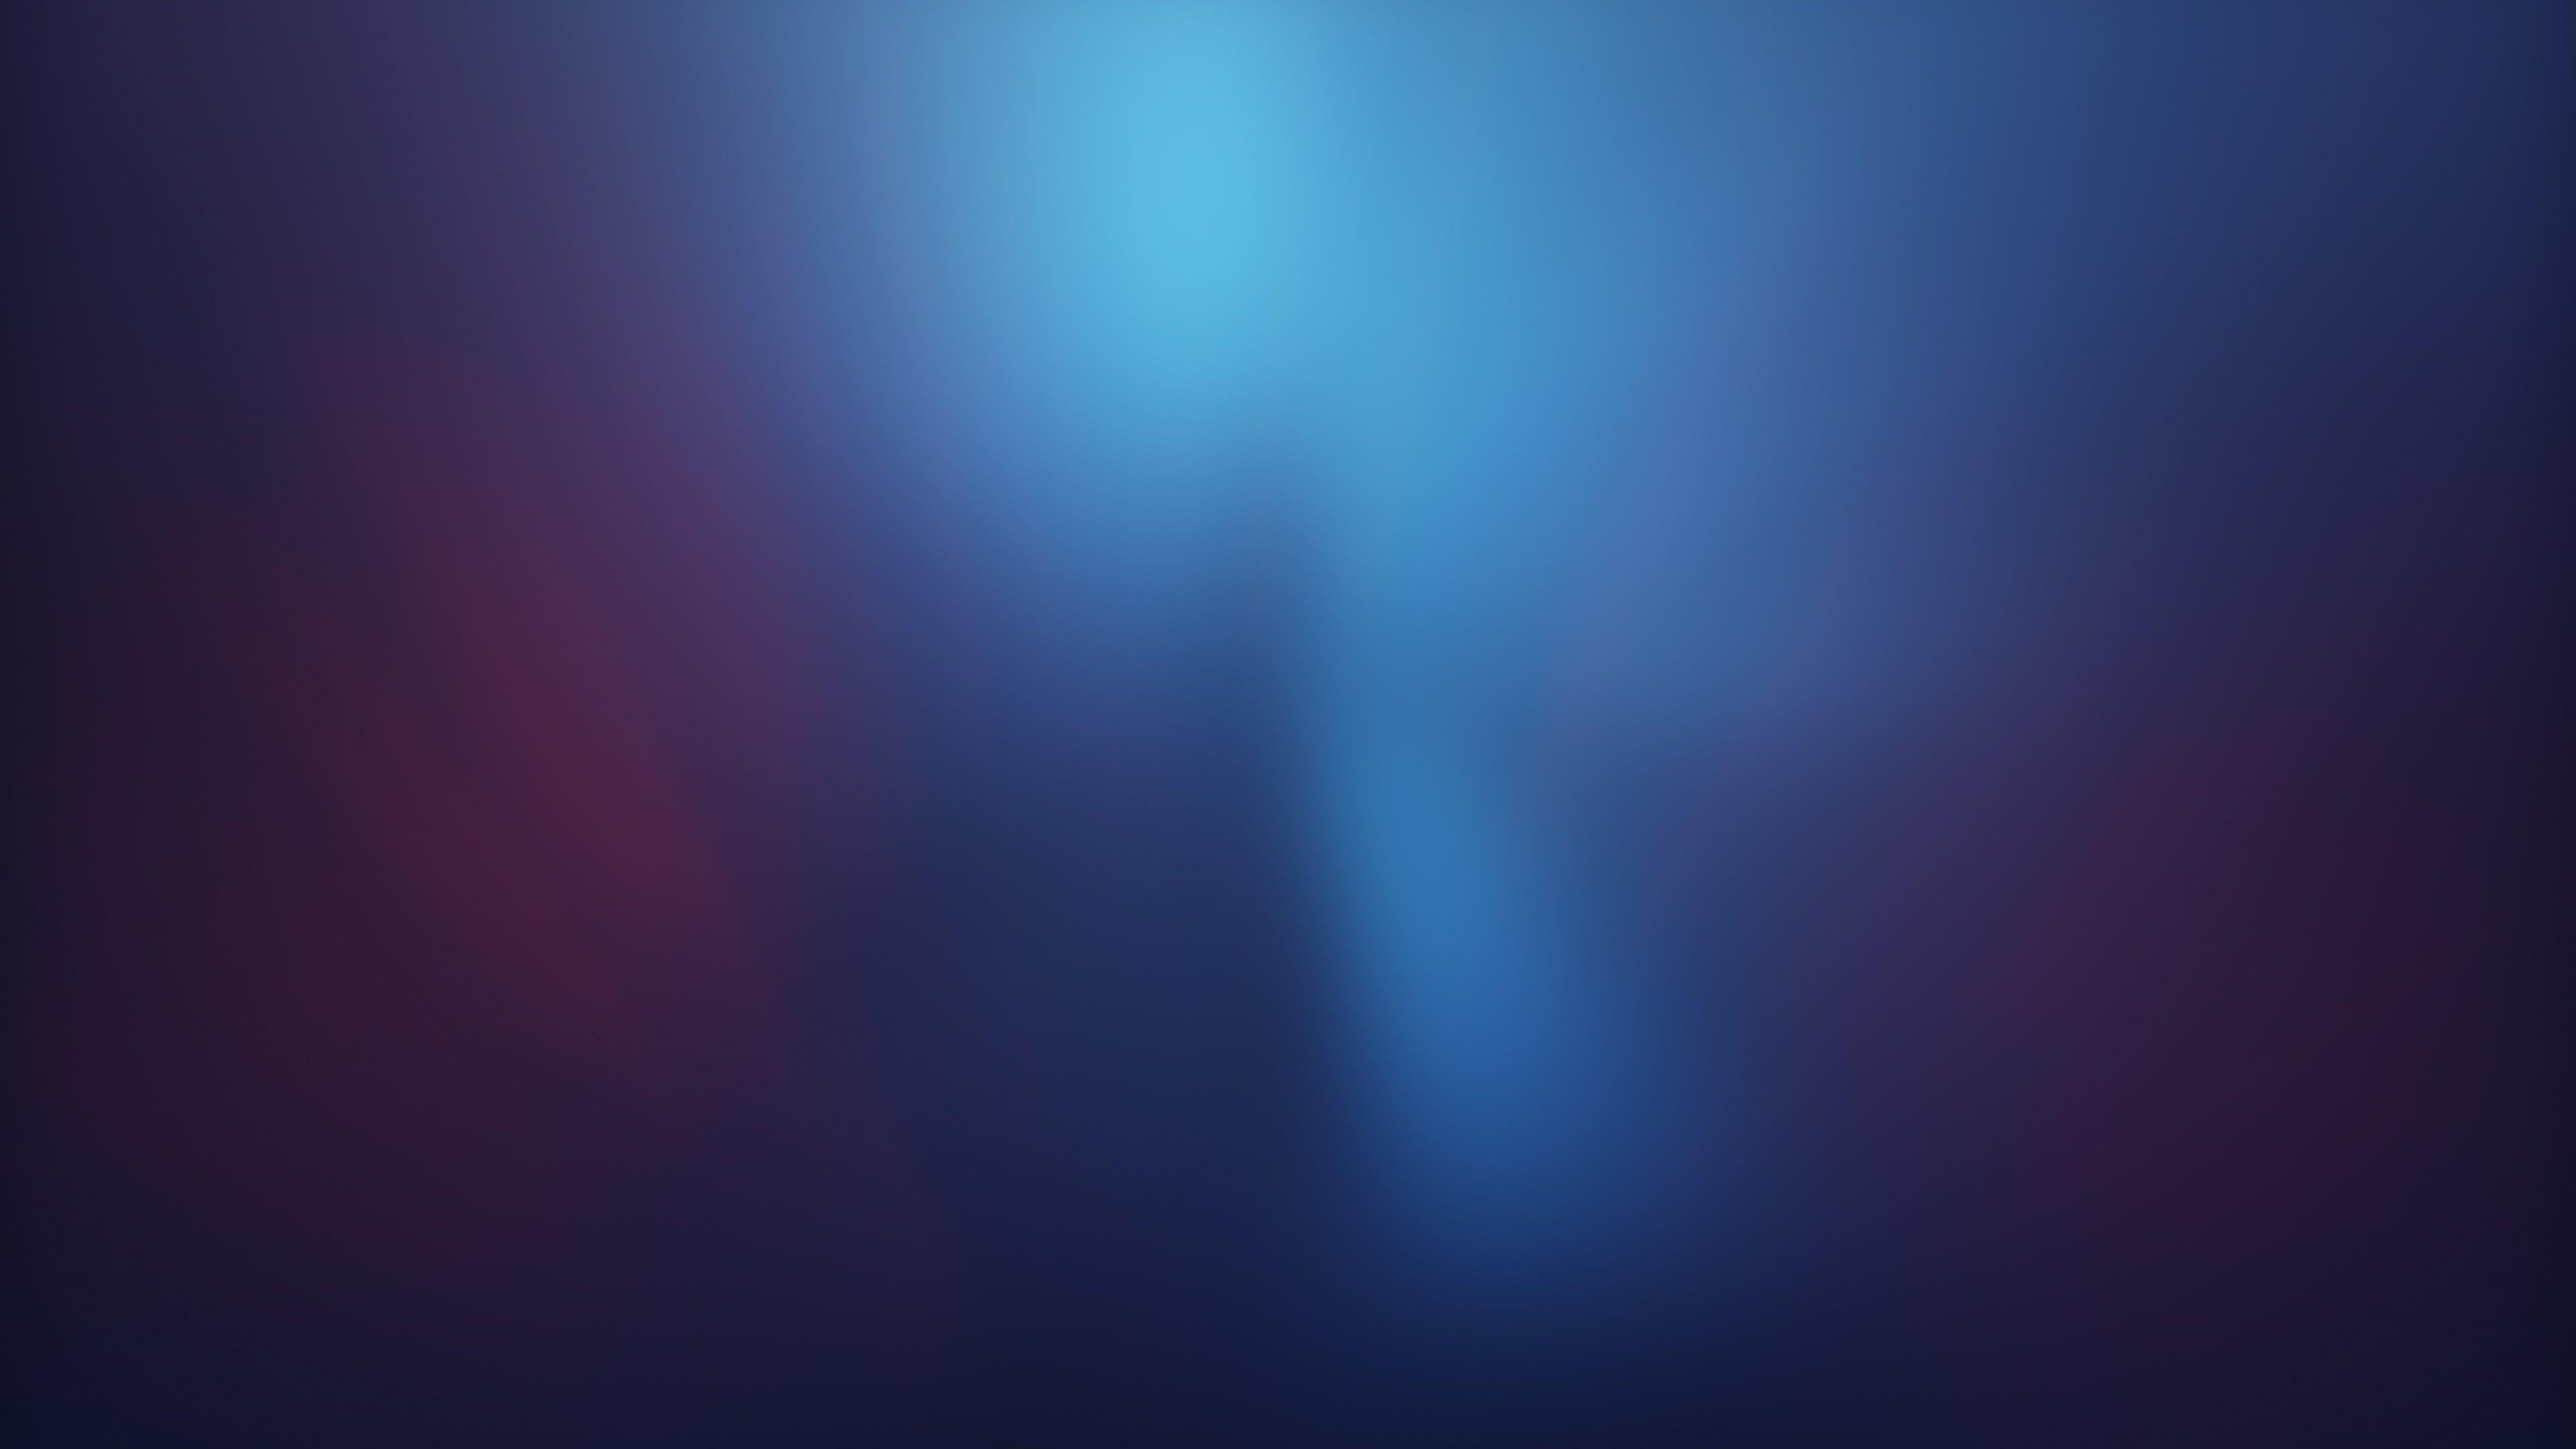 Blur 4K wallpaper for your desktop or mobile screen free and easy to download